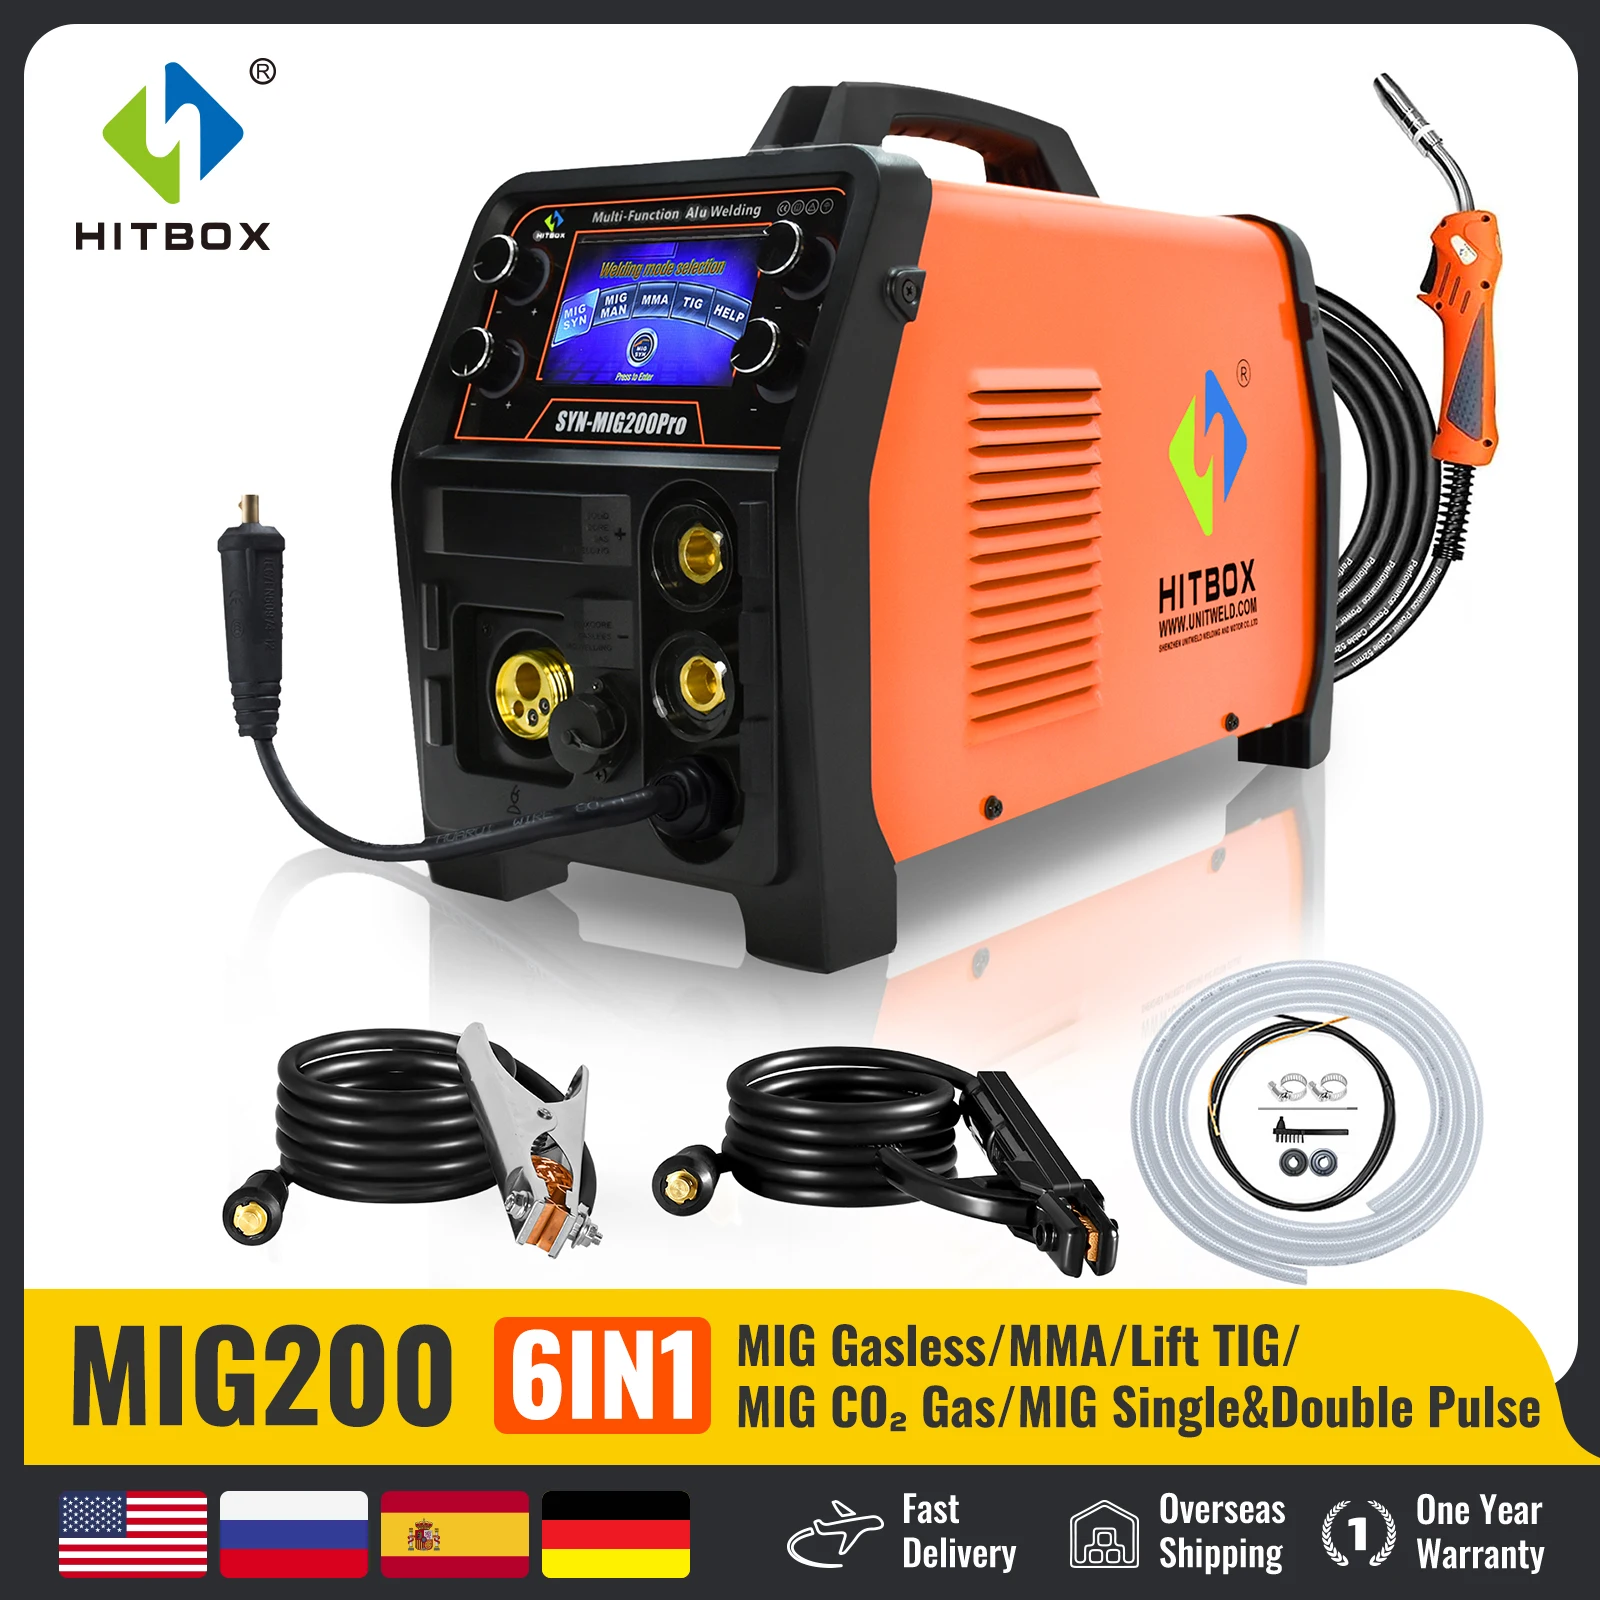 

HITBOX 5 in 1 Aluminium MIG MAG Welder with MMA TIG Gas Gasless Welding Machine Inverter Semi-Automatic IGBT 2T/4T SYN MIG200PRO